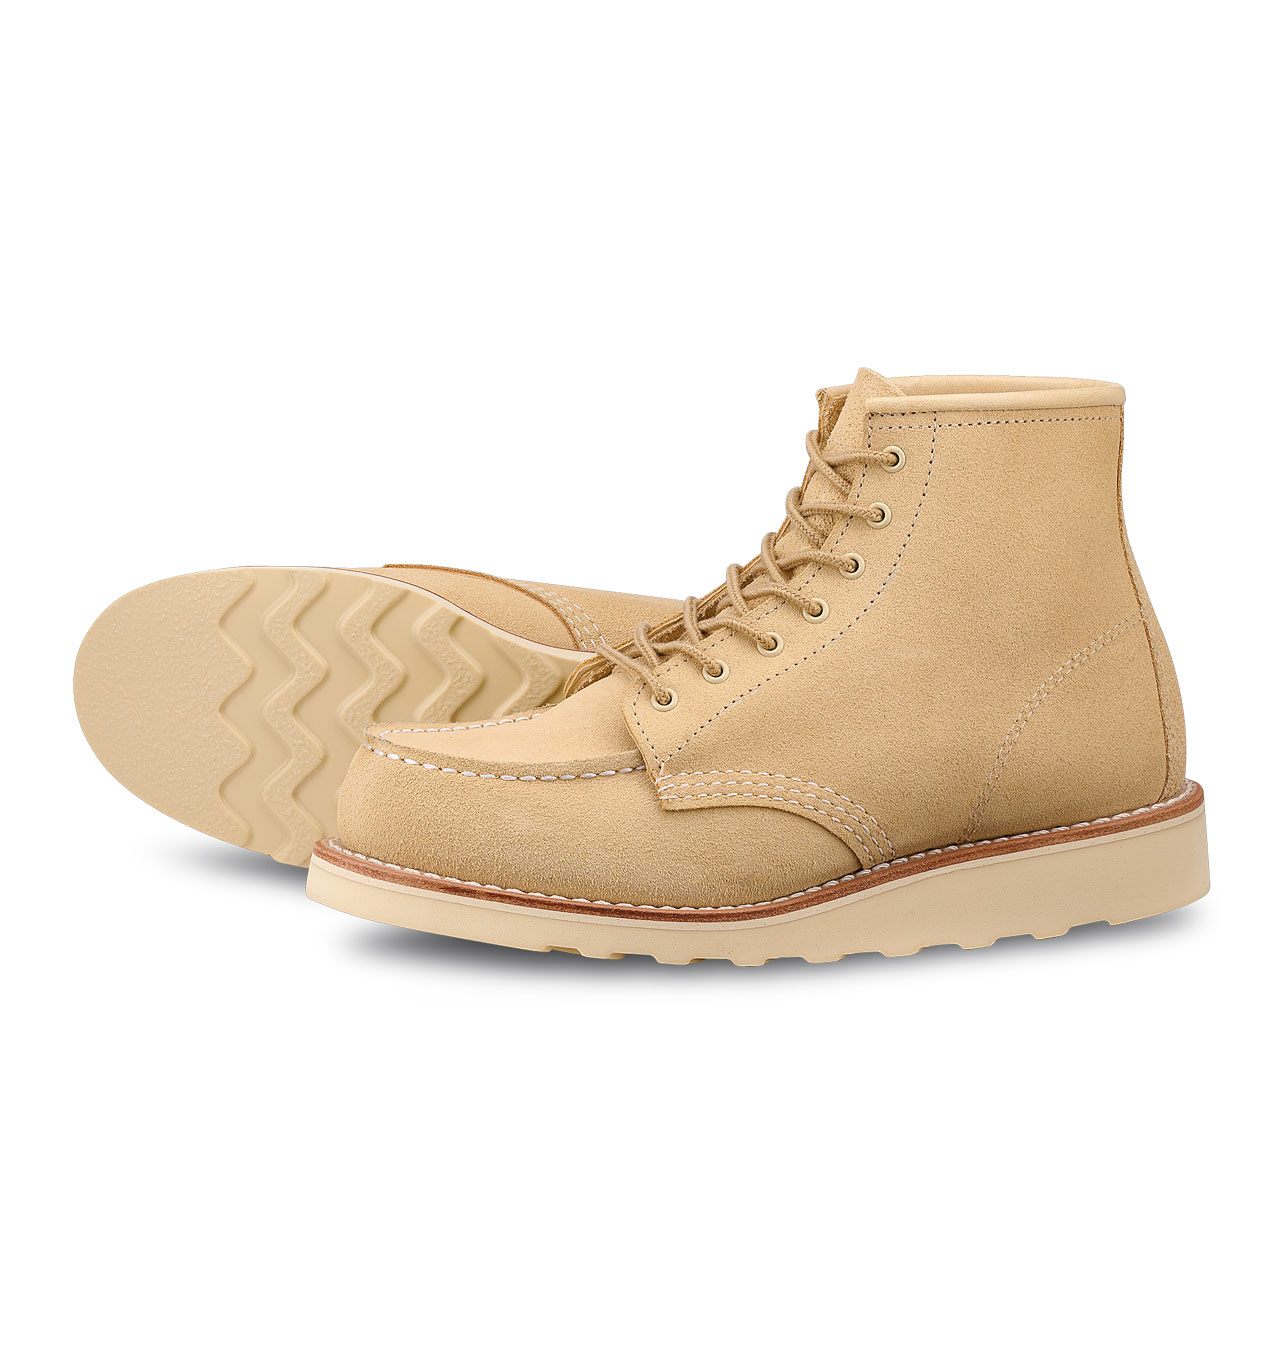 Red Wing Shoes Woman 3328 6-Inch Moc Toe - Cream Abilene Leather